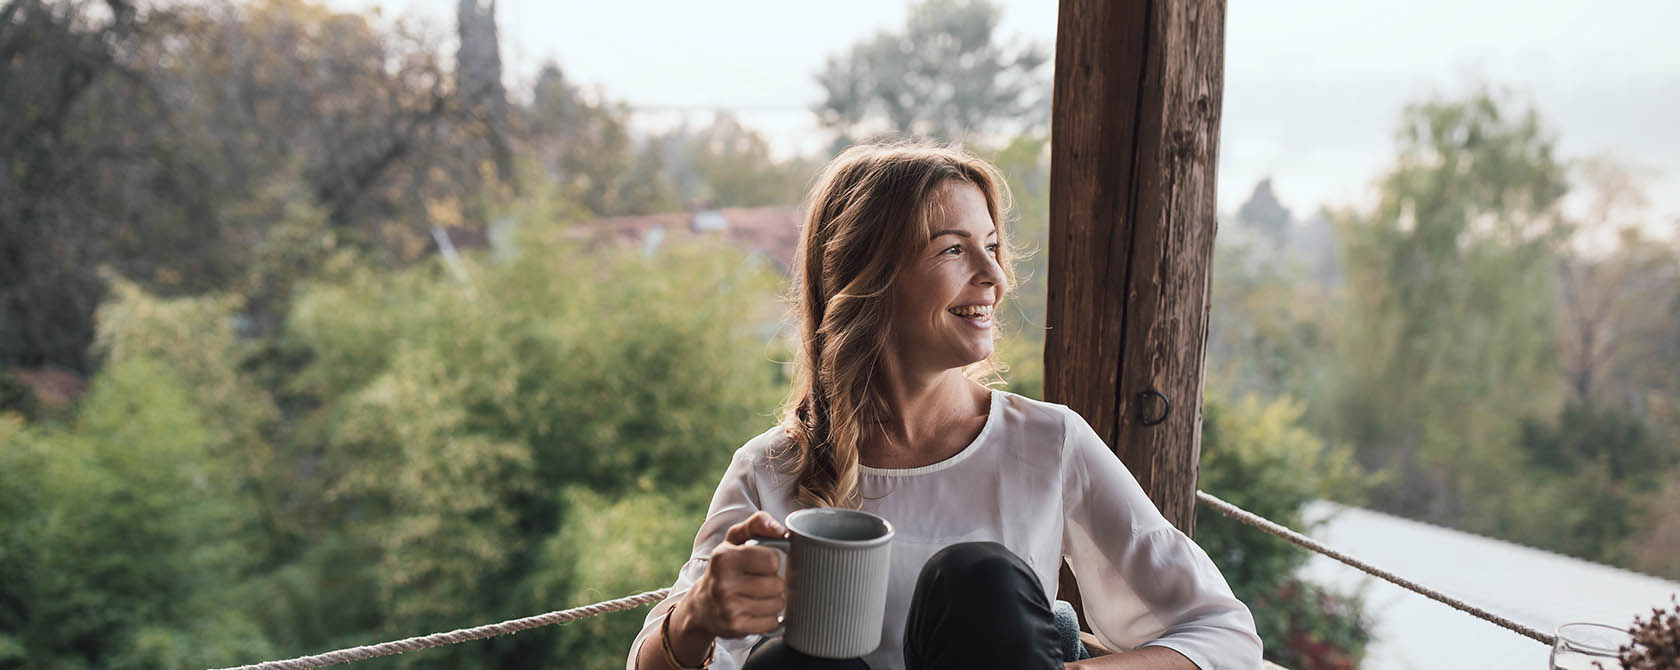 Woman smiling, drinking out of a mug on a balcony. She looks off to the distance.